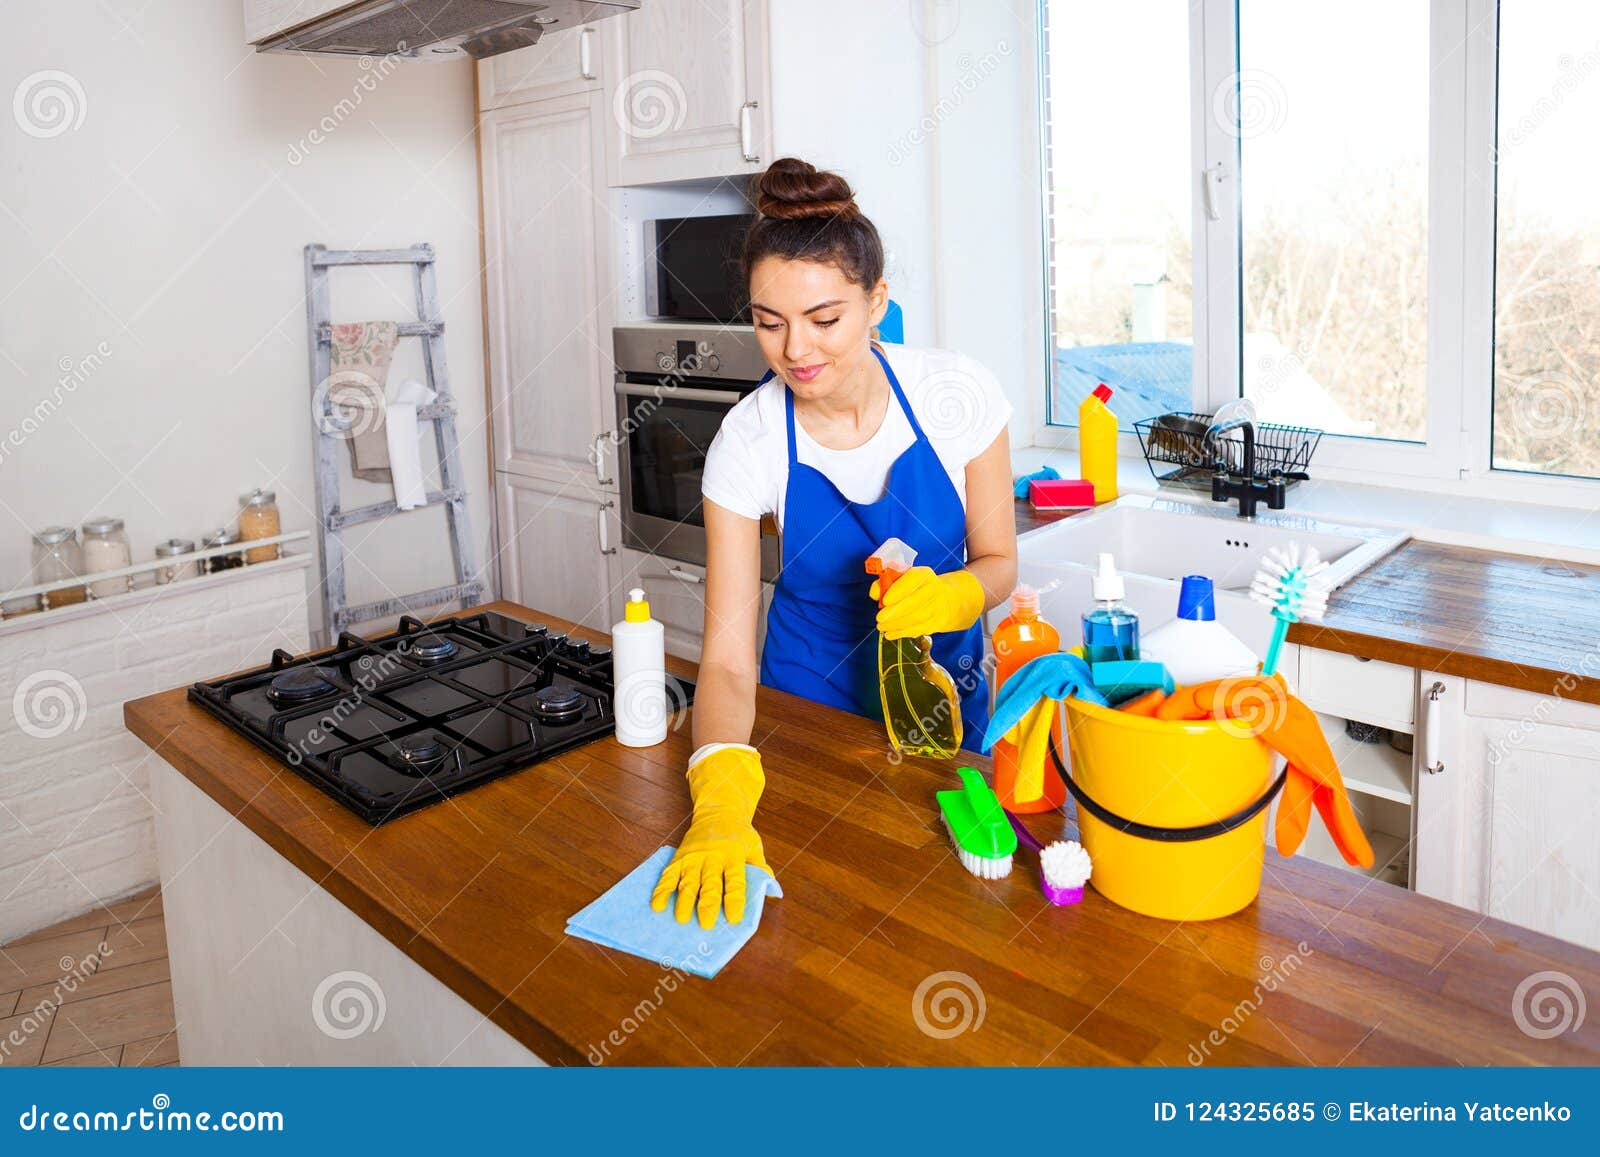 Beautiful Young Woman Makes Cleaning The House Girl Cleaning Kitchen Set Stock Image Image Of Dust